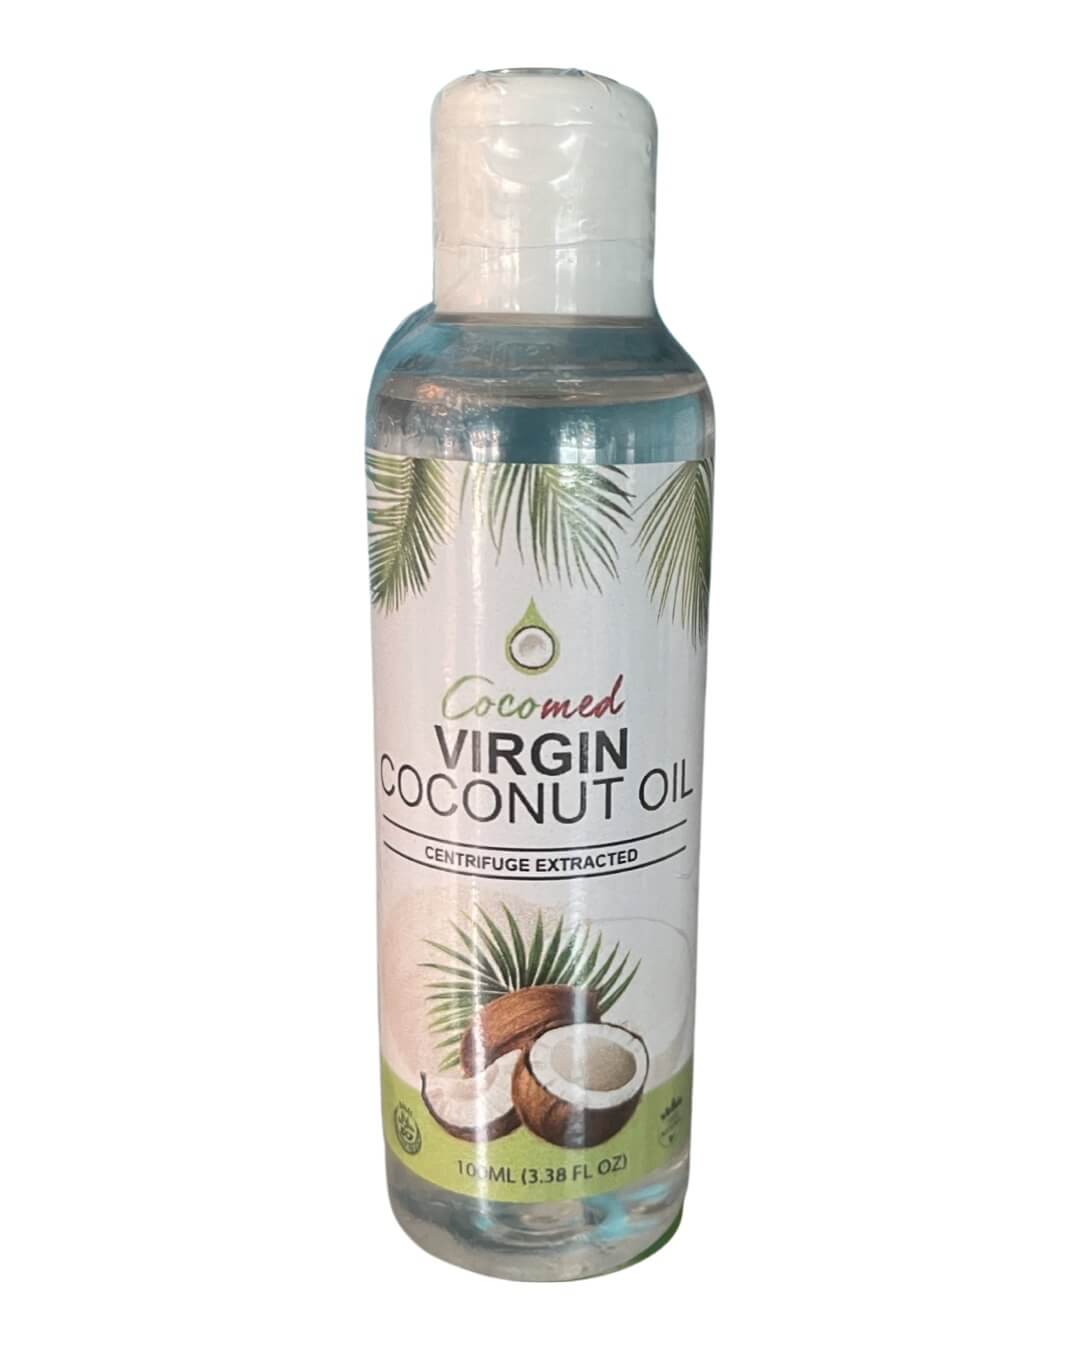 Cocomed Virgin Coconut Oil Centrifuge Extracted  100mL